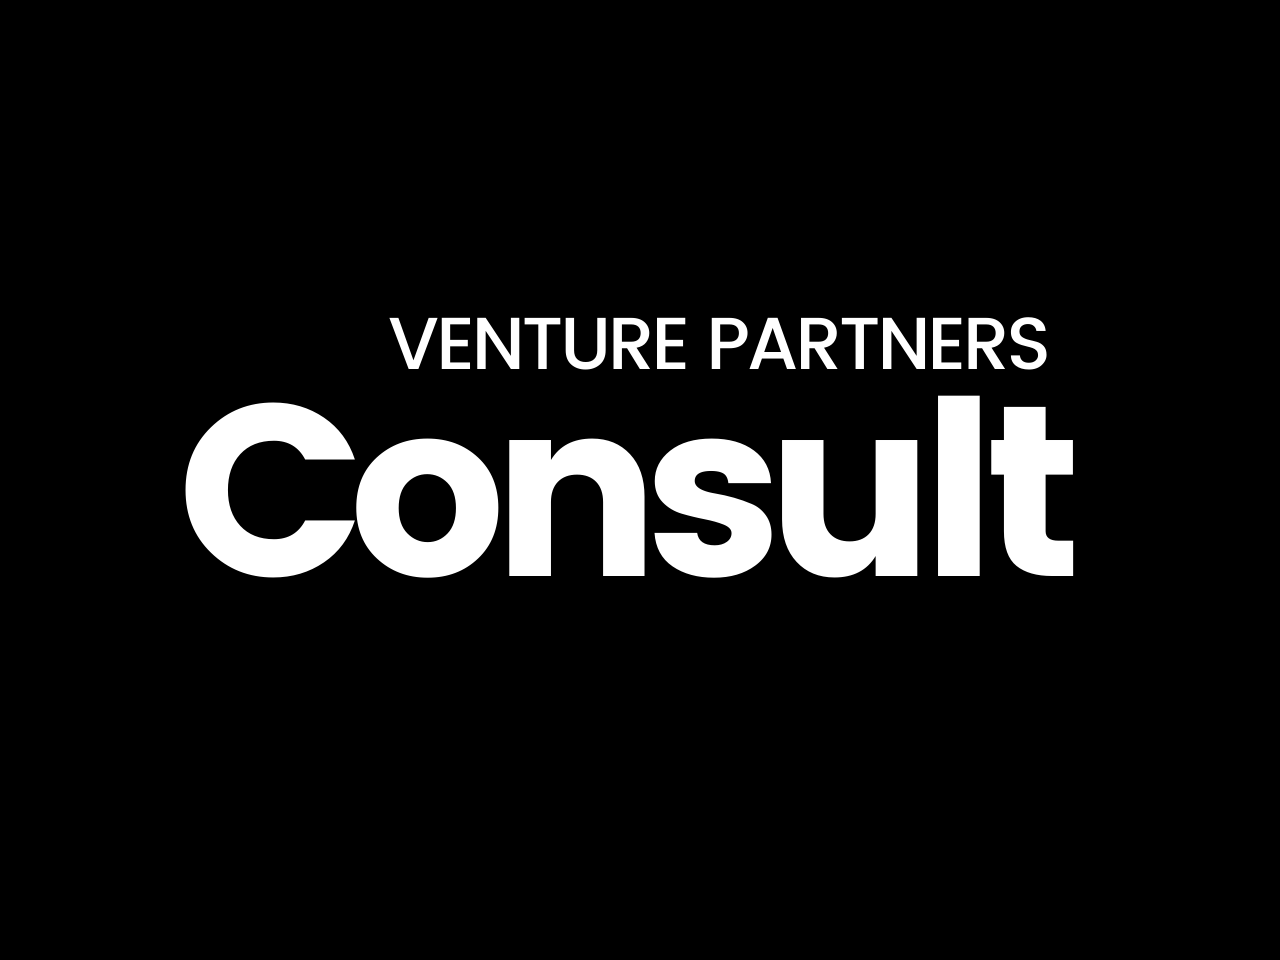 Consult Venture Partners launches with award-winning expertise to empower private equity firms.